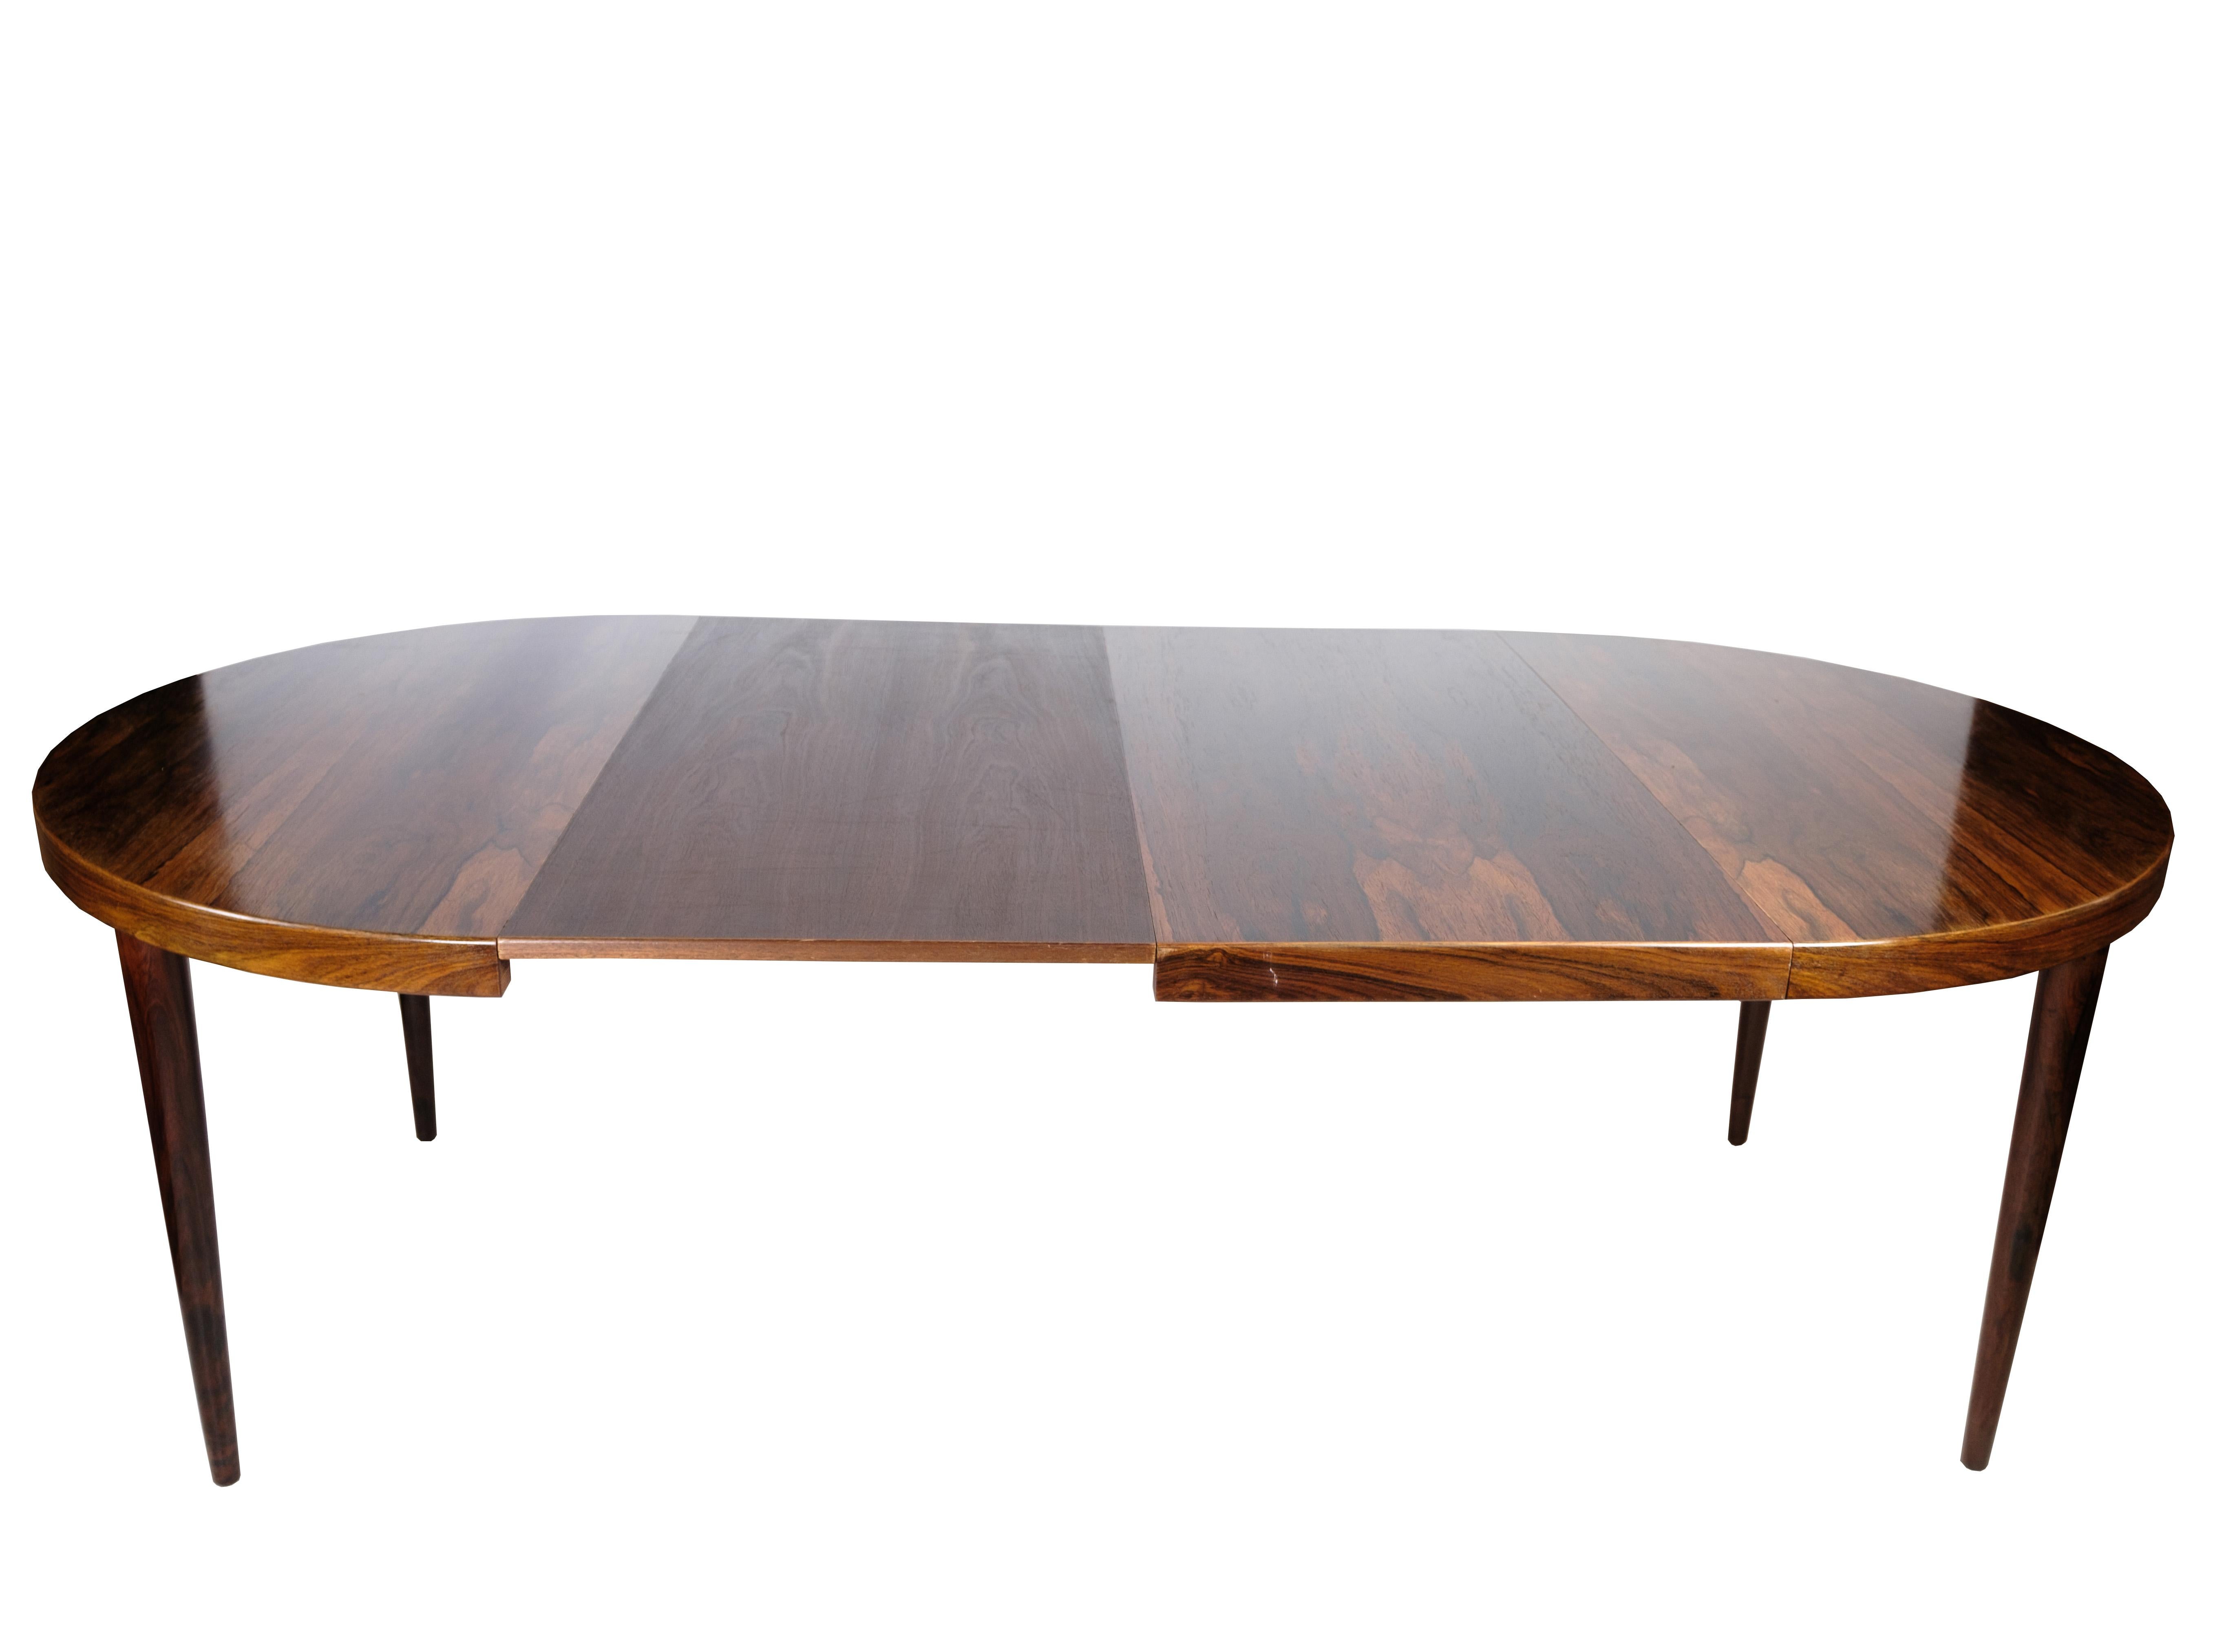 A round dining table crafted in rosewood by Omann Junior, showcasing Danish design excellence from the 1960s. This elegant piece features easily removable legs and a beautifully structured tabletop, adding a touch of sophistication to any dining